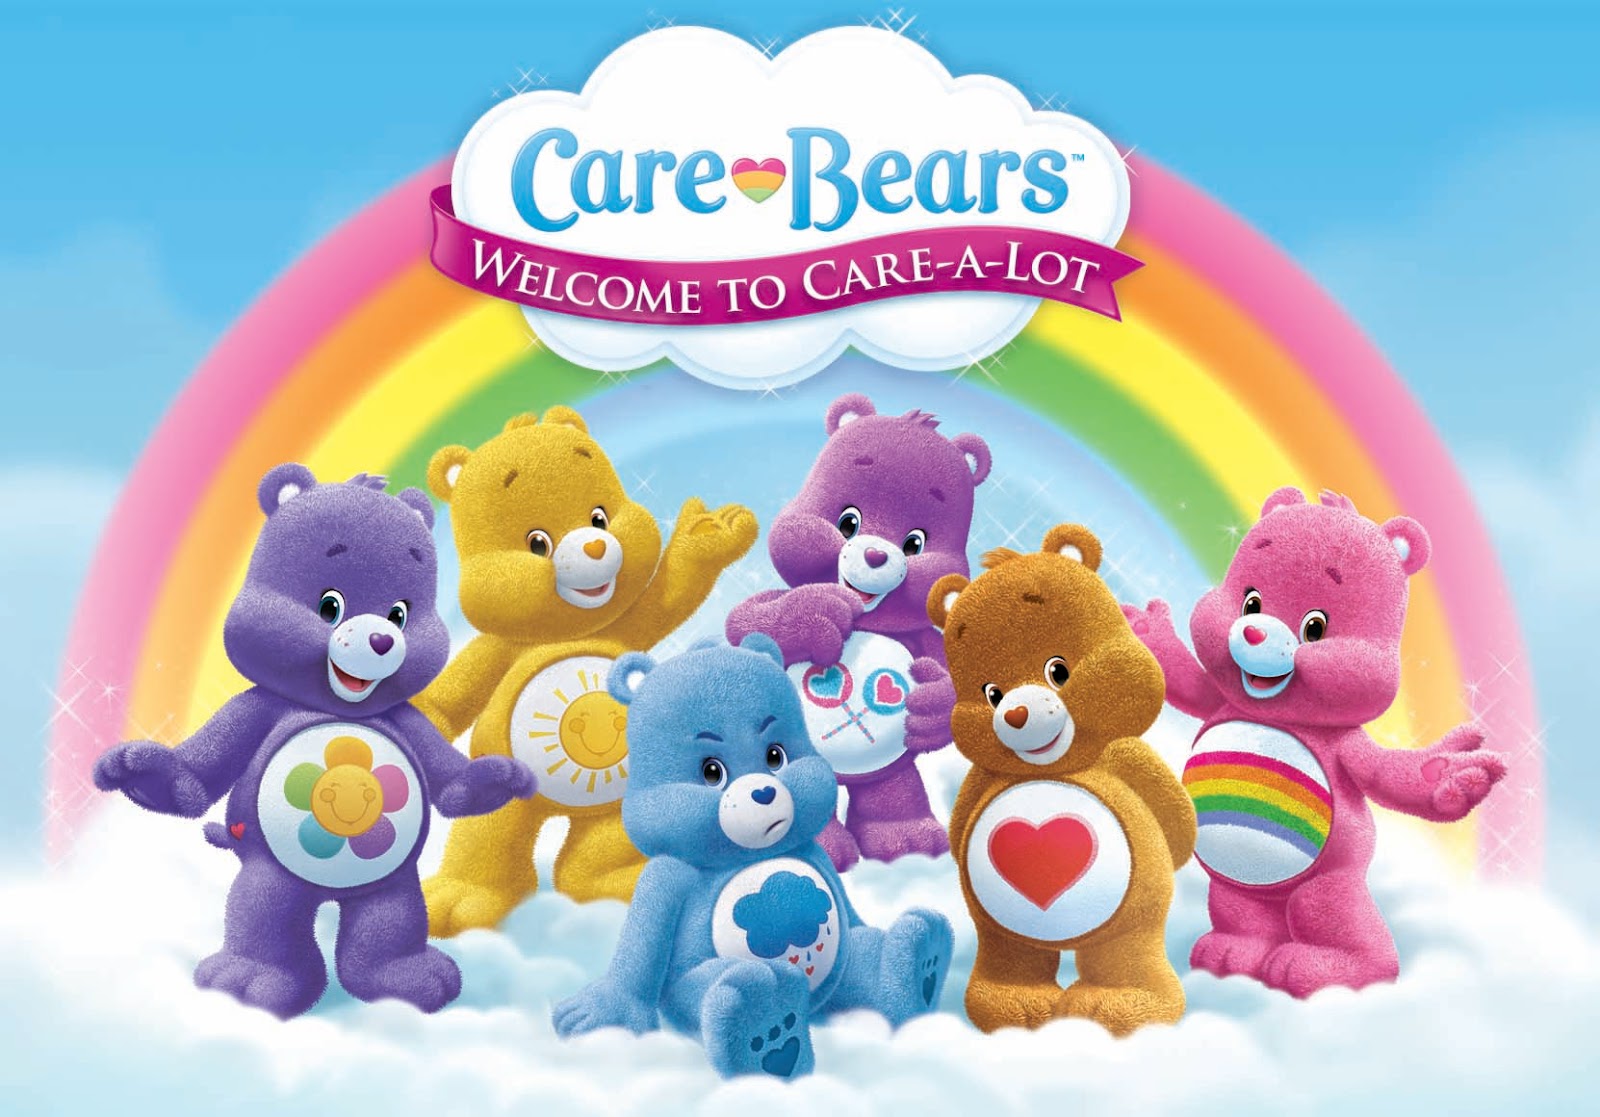 Care+Bears+Welcome+to+Care-A-Lot+Logo.jpg